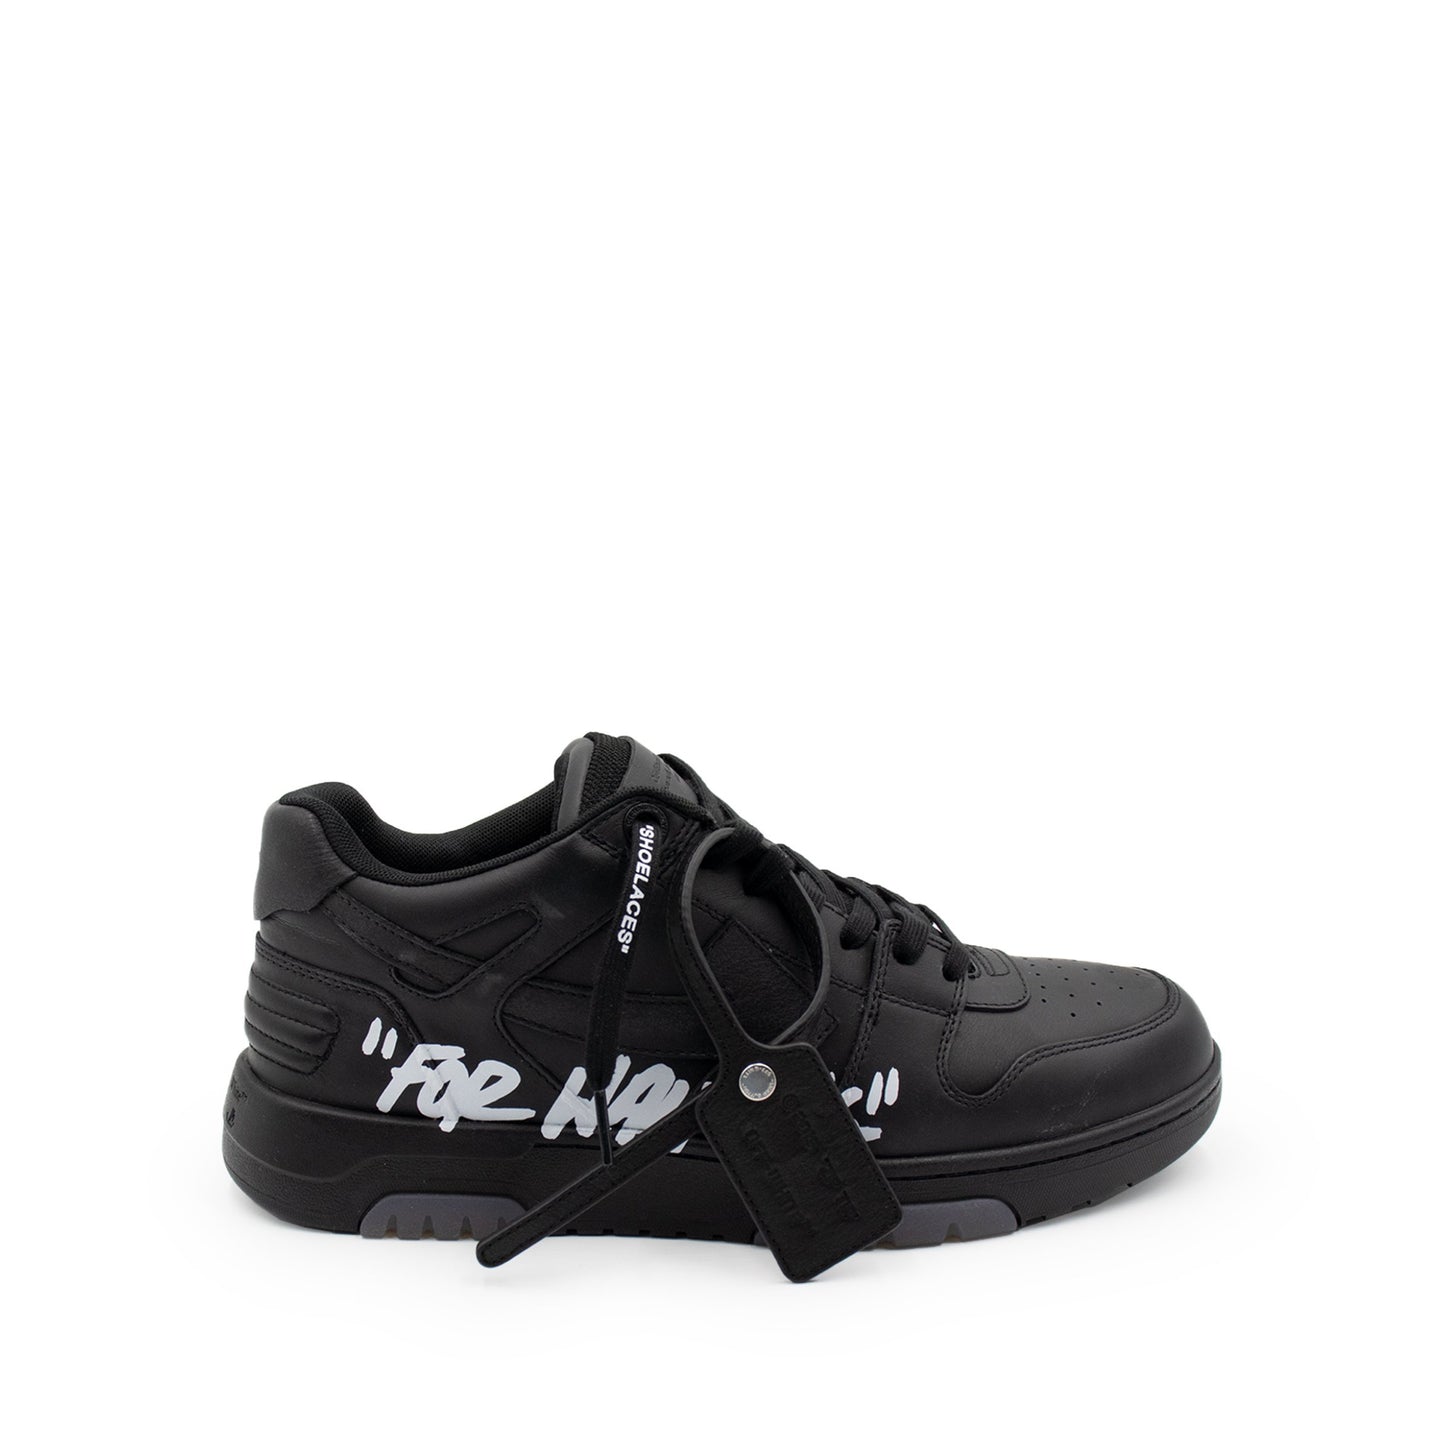 Out Of Office Sneakers "For Walking" in Black & White